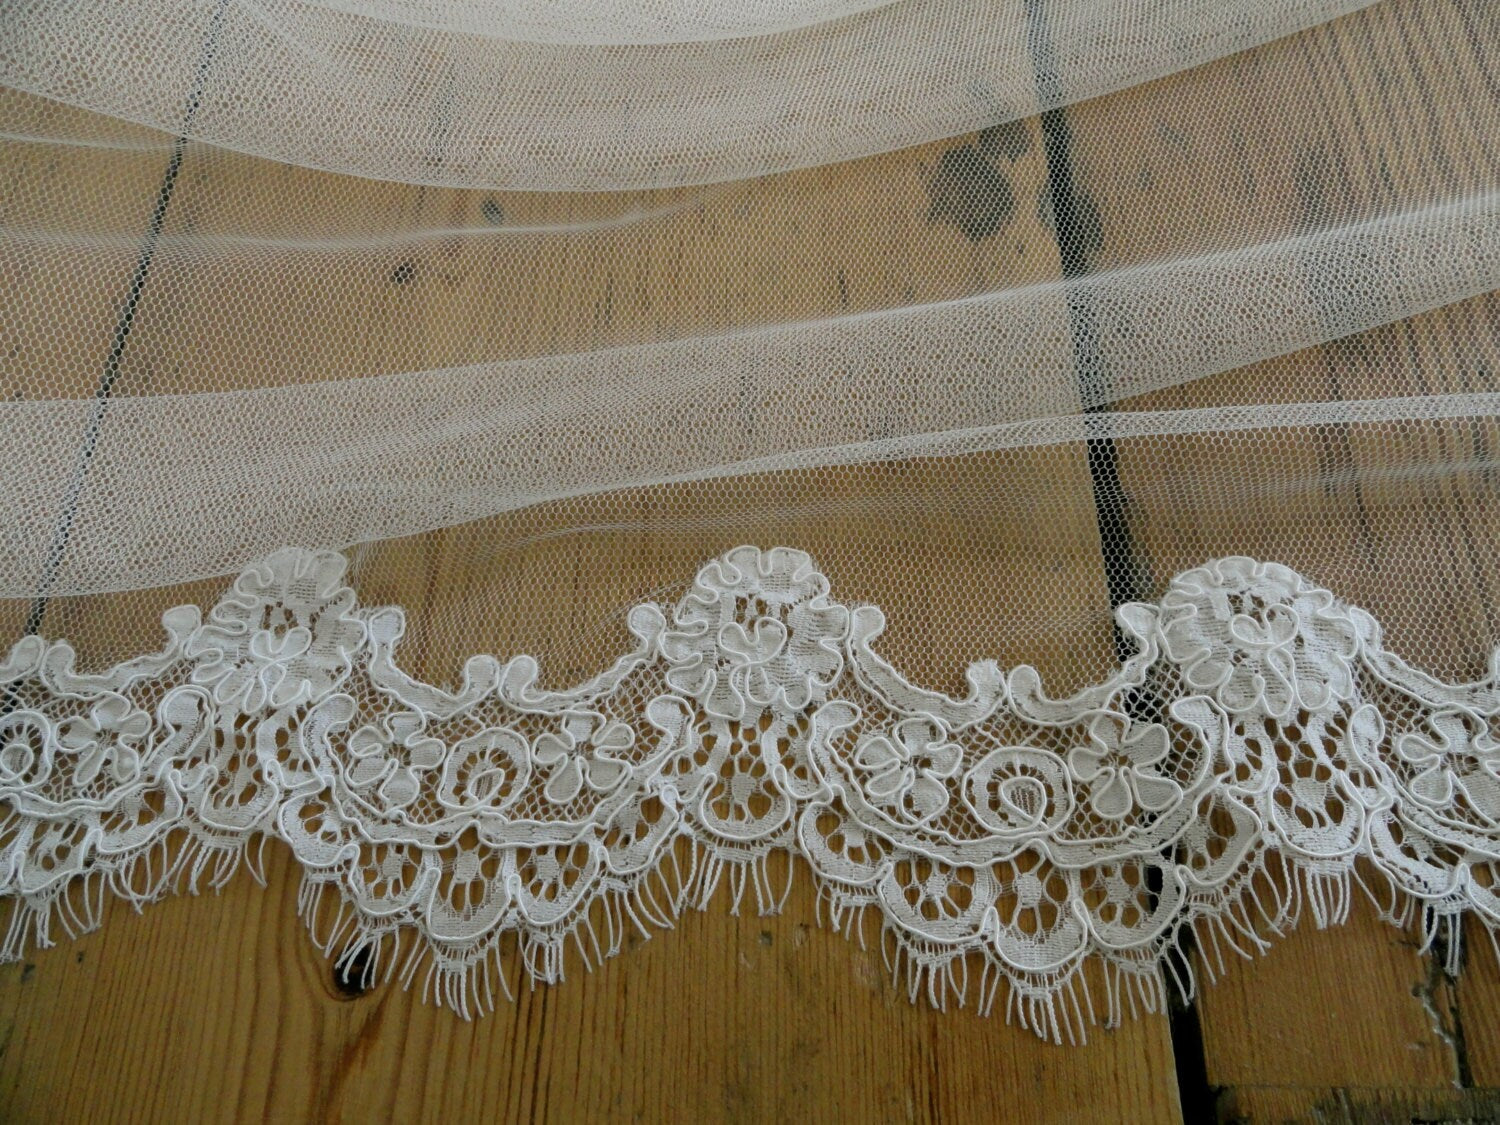 Lace couture wedding veils, Truro, Cornwall, UK